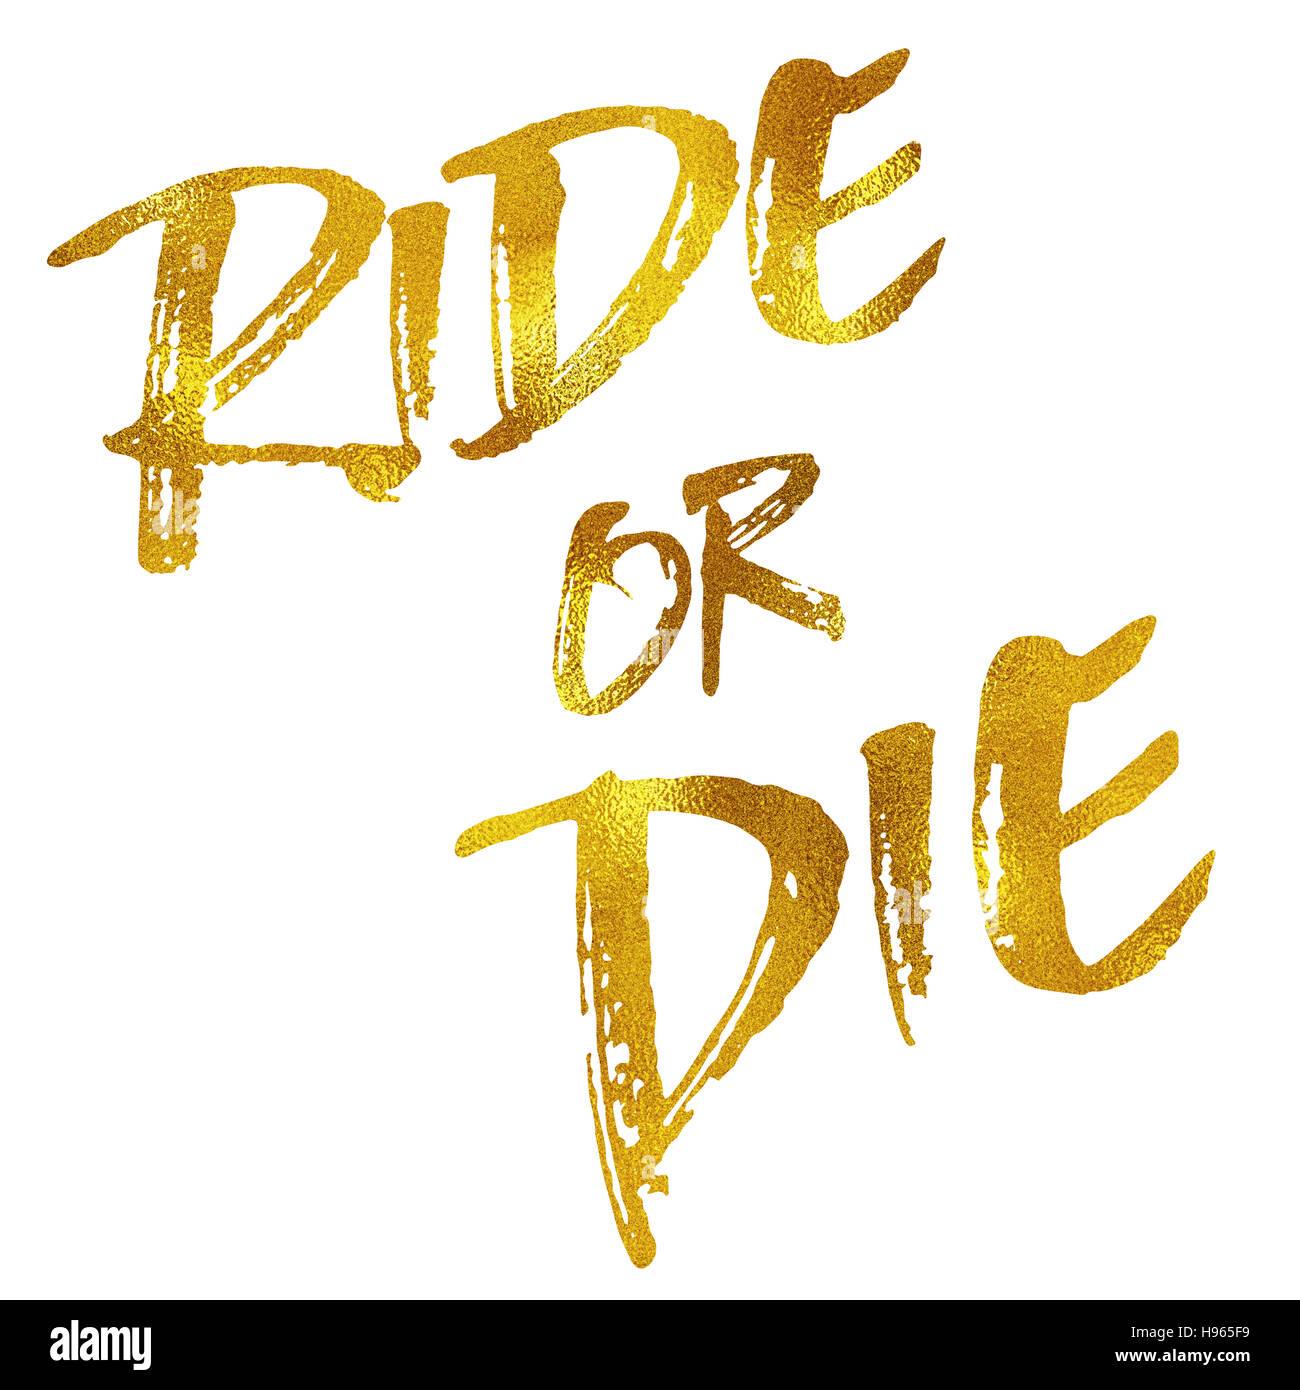 Ride or Die Gold Faux Foil Metallic Motivational Quote Isolated Stock Photo